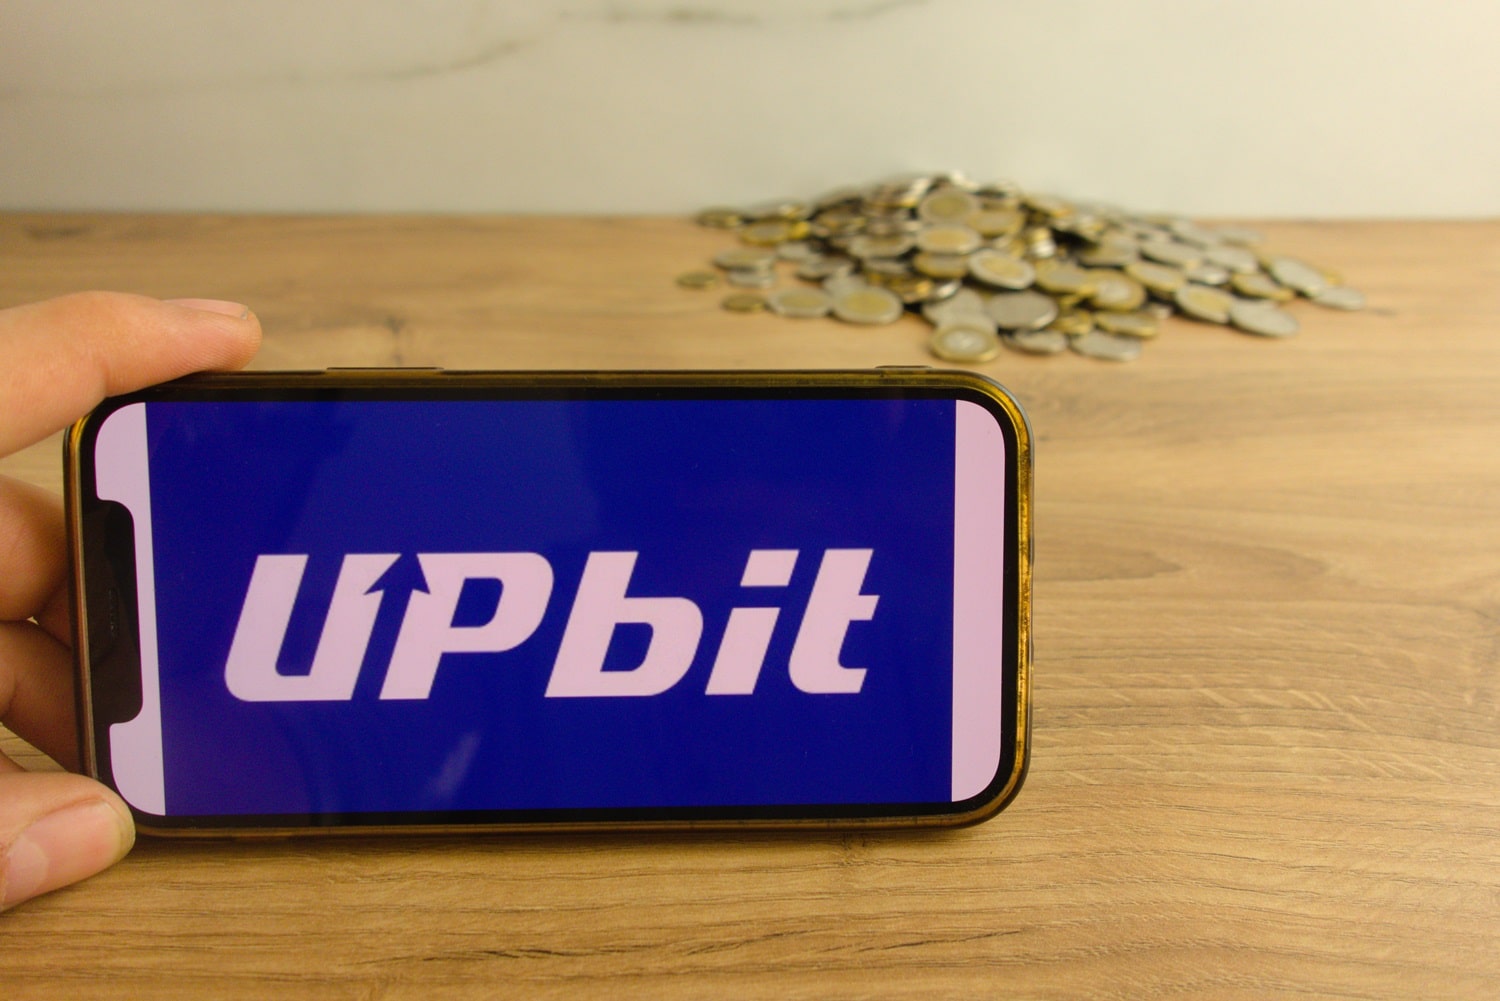 The Upbit cryptocurrency exchange logo on a mobile phone, with a pile of metal coins on a wooden surface in the background.